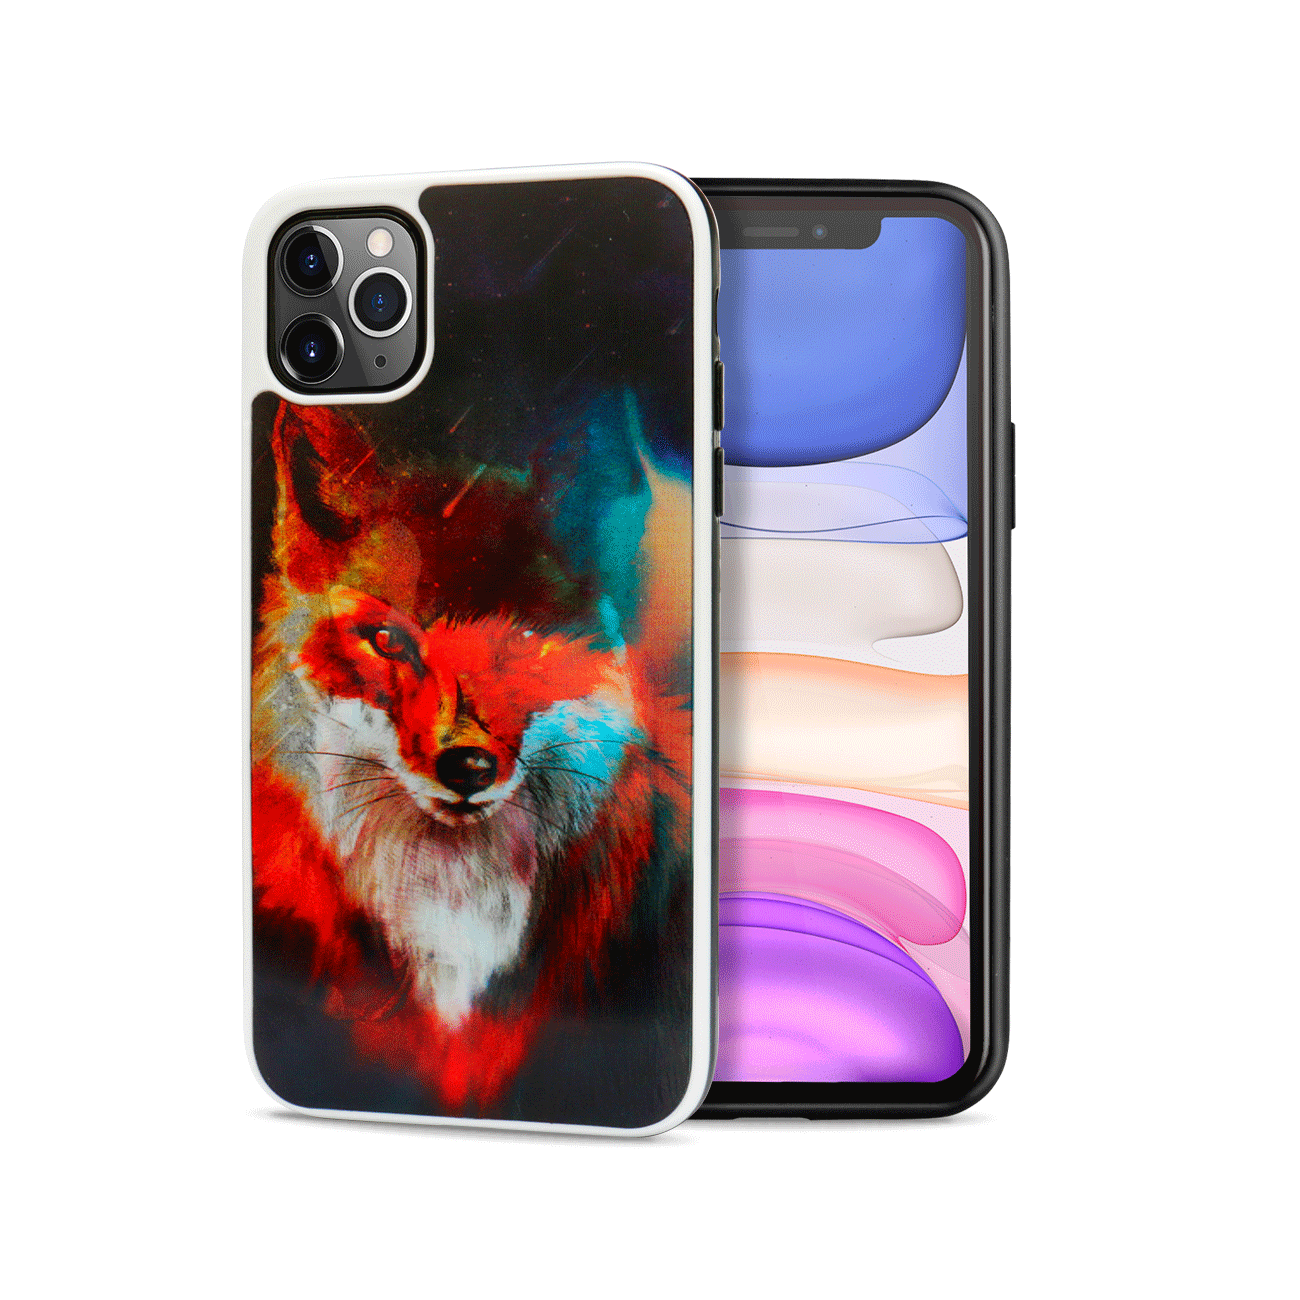 iPHONE 11 Pro Max (6.5in) 3D Dynamic Change Lenticular Design Case (Wolf)